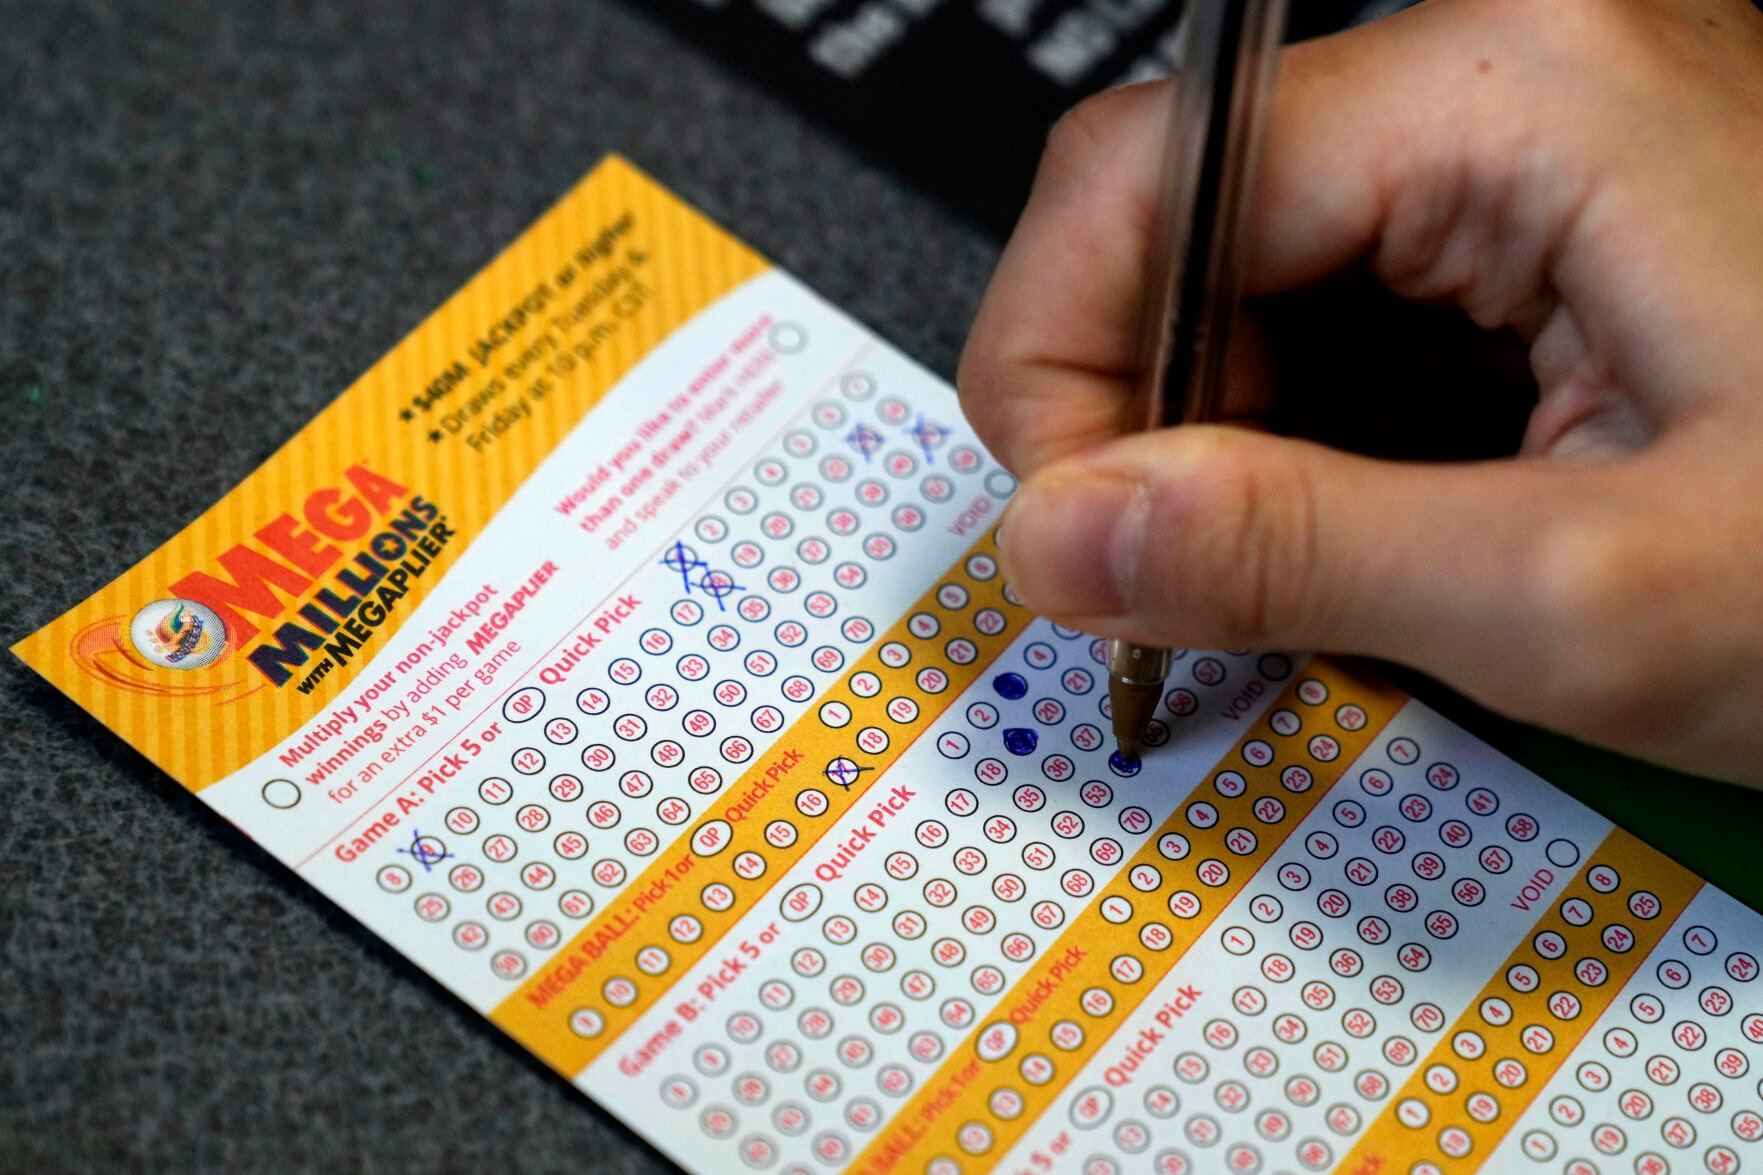 <p>A customer fills out a Mega Millions lottery ticket at a convenience store Tuesday, Jan. 3, 2023, in Northbrook, Ill. (AP Photo/Nam Y. Huh)</p>   PHOTO CREDIT: Nam Y. Huh 